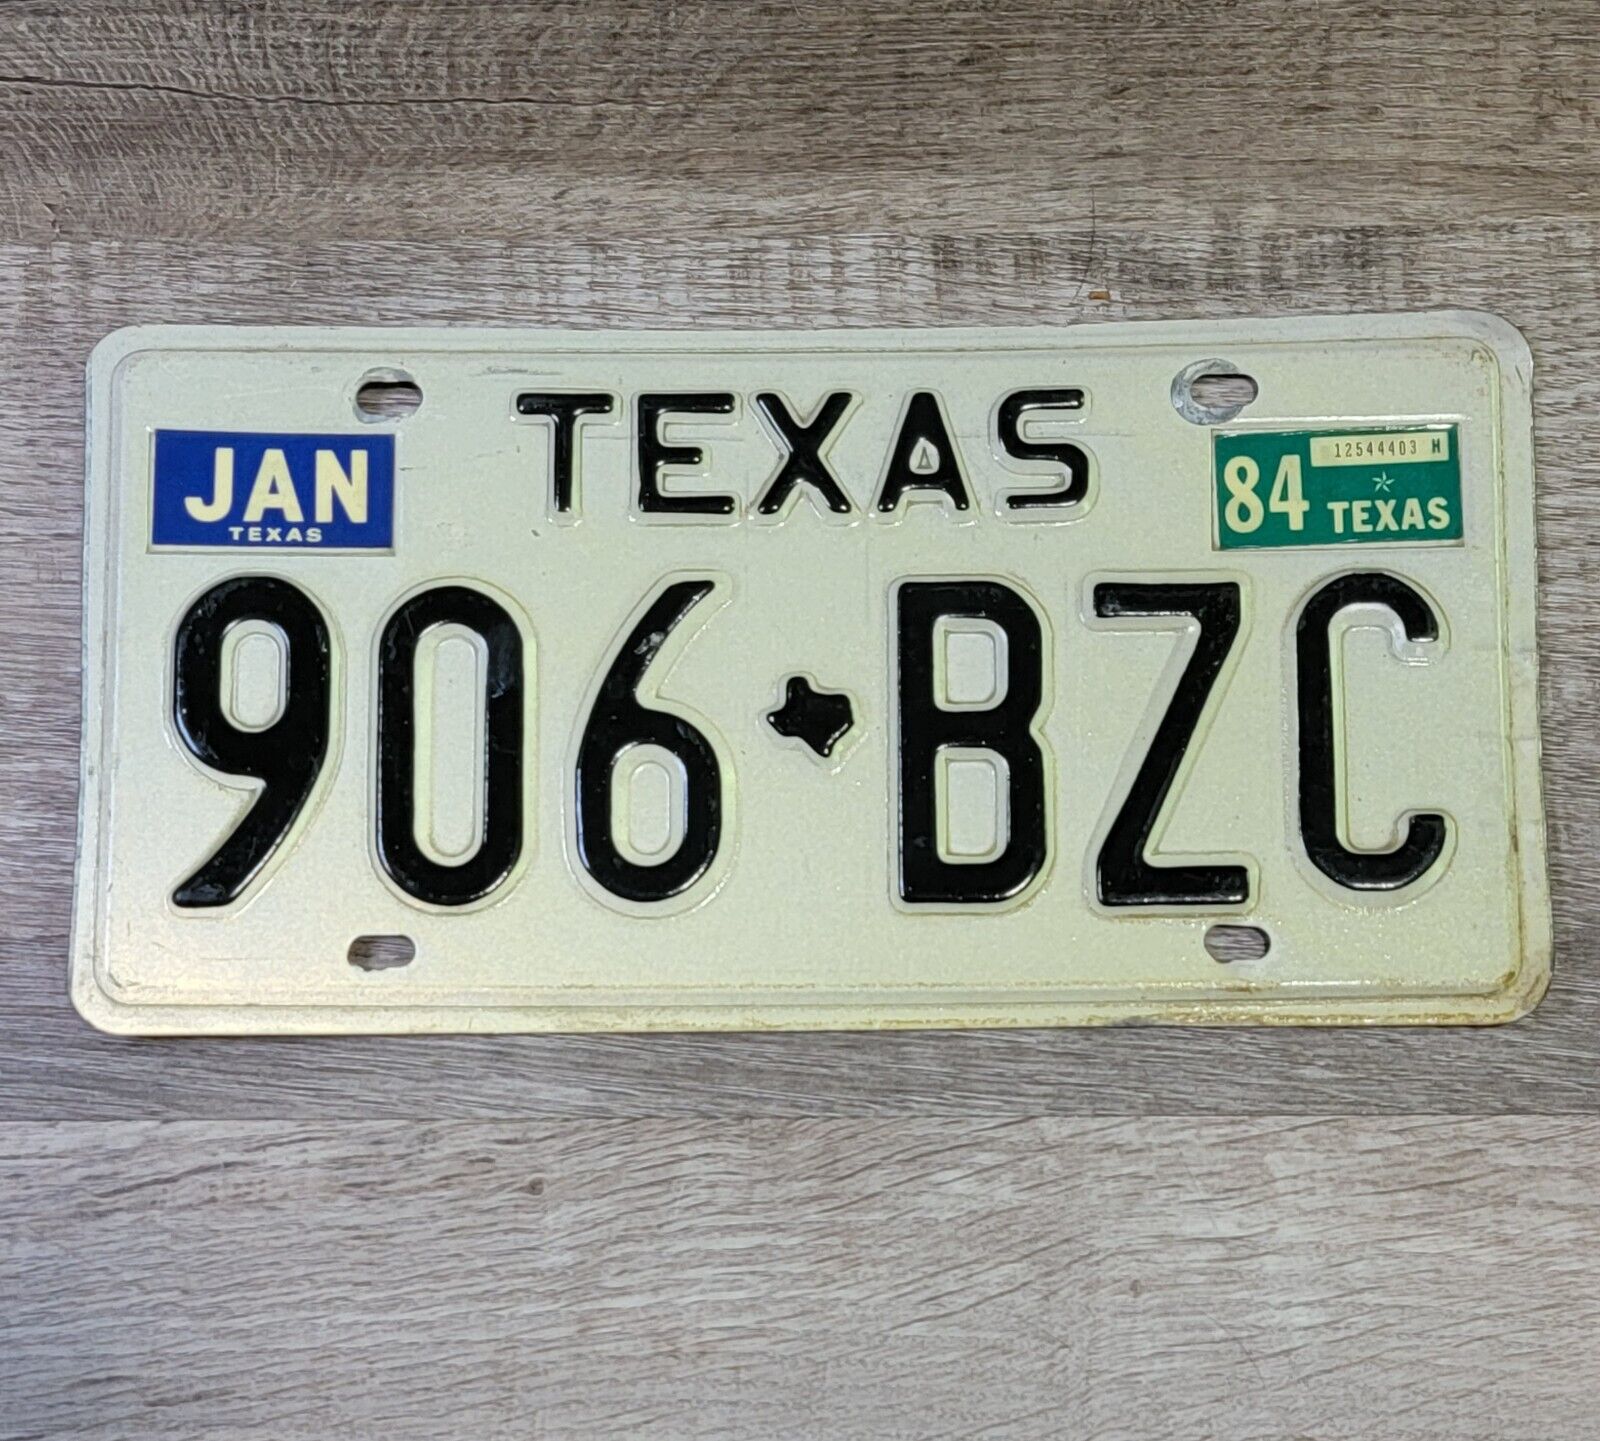 1994 Texas License Plate - JPF-08T  Canceled Expired